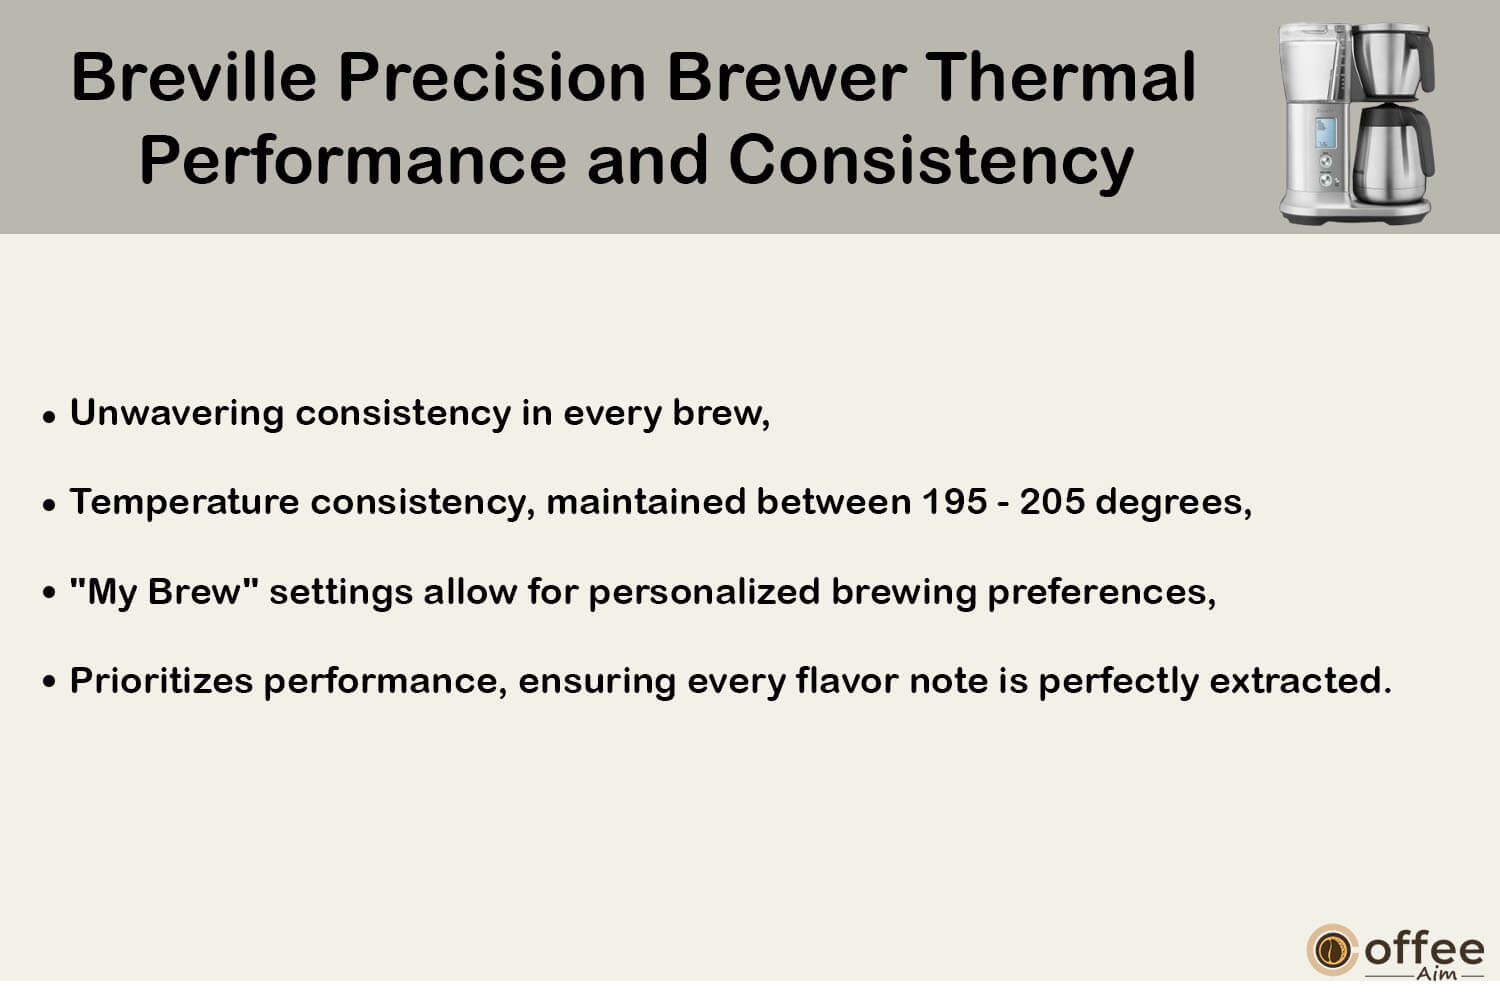 "This image illustrates the performance and consistency of the 'Breville Precision Brewer Thermal' as featured in our 'Breville Precision Brewer Thermal Review' article."